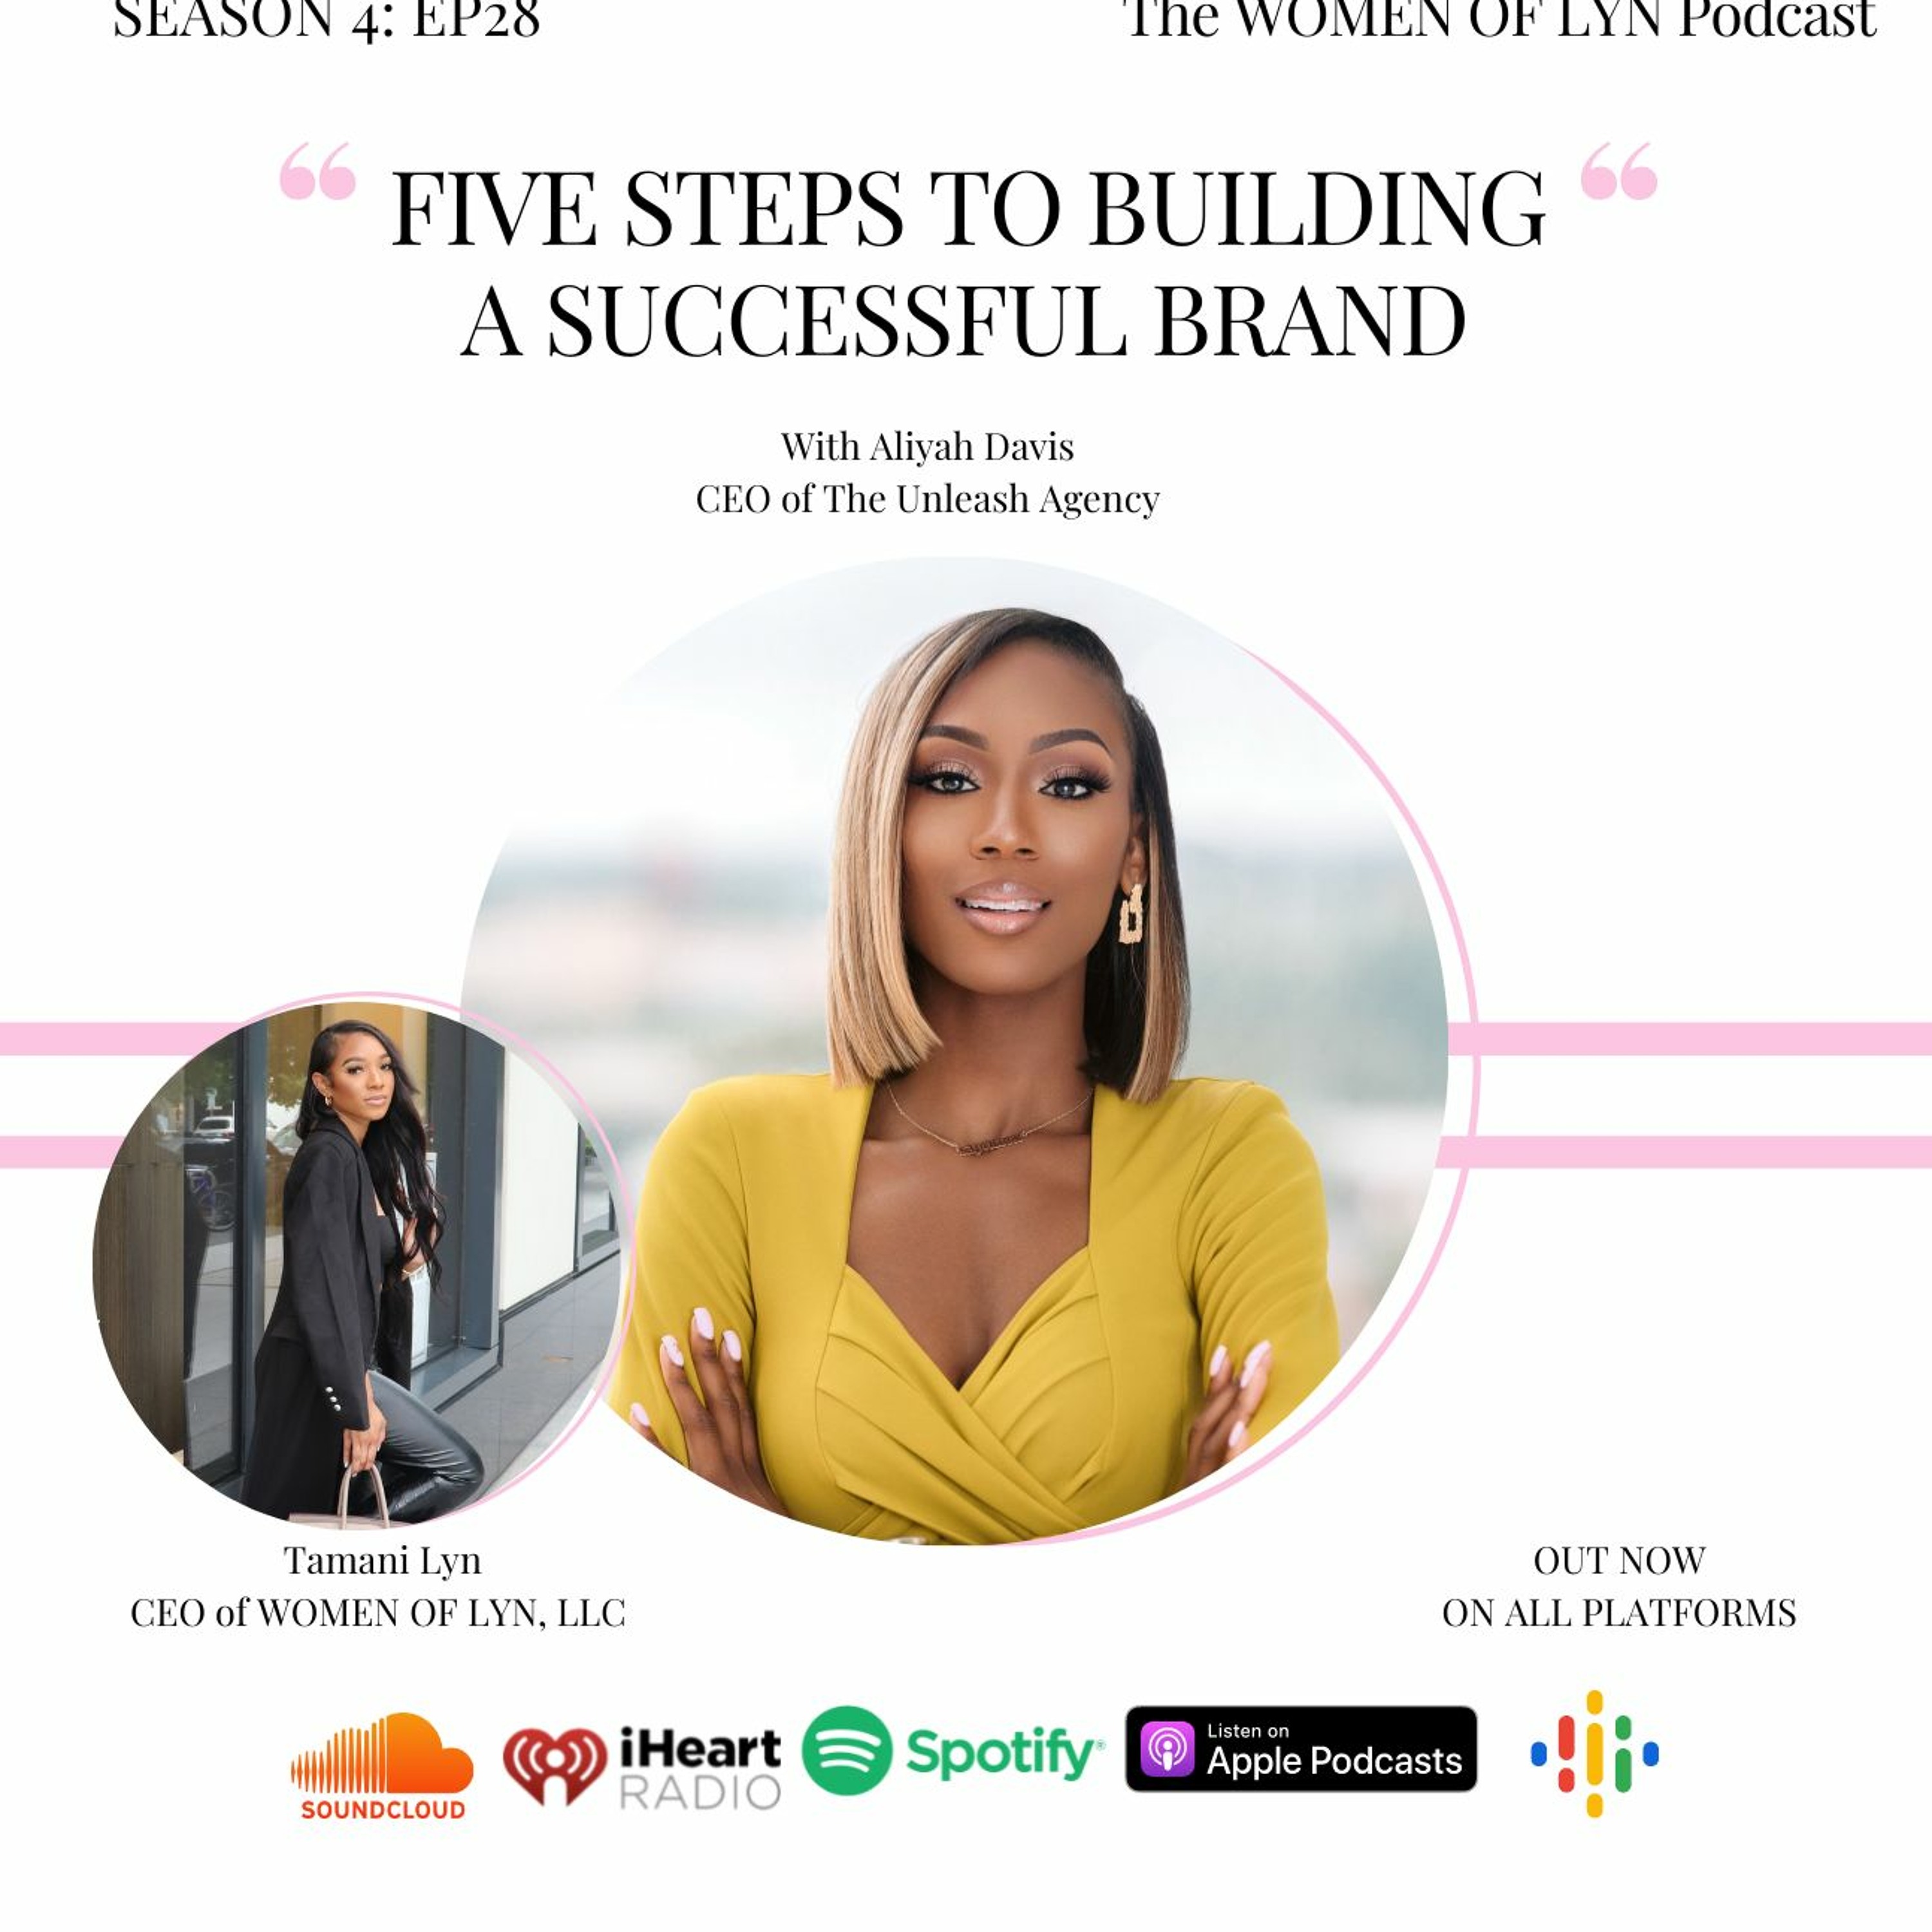 Episode 28: 'Five Steps To Building A Successful Brand' Ft. Aliyah Davis